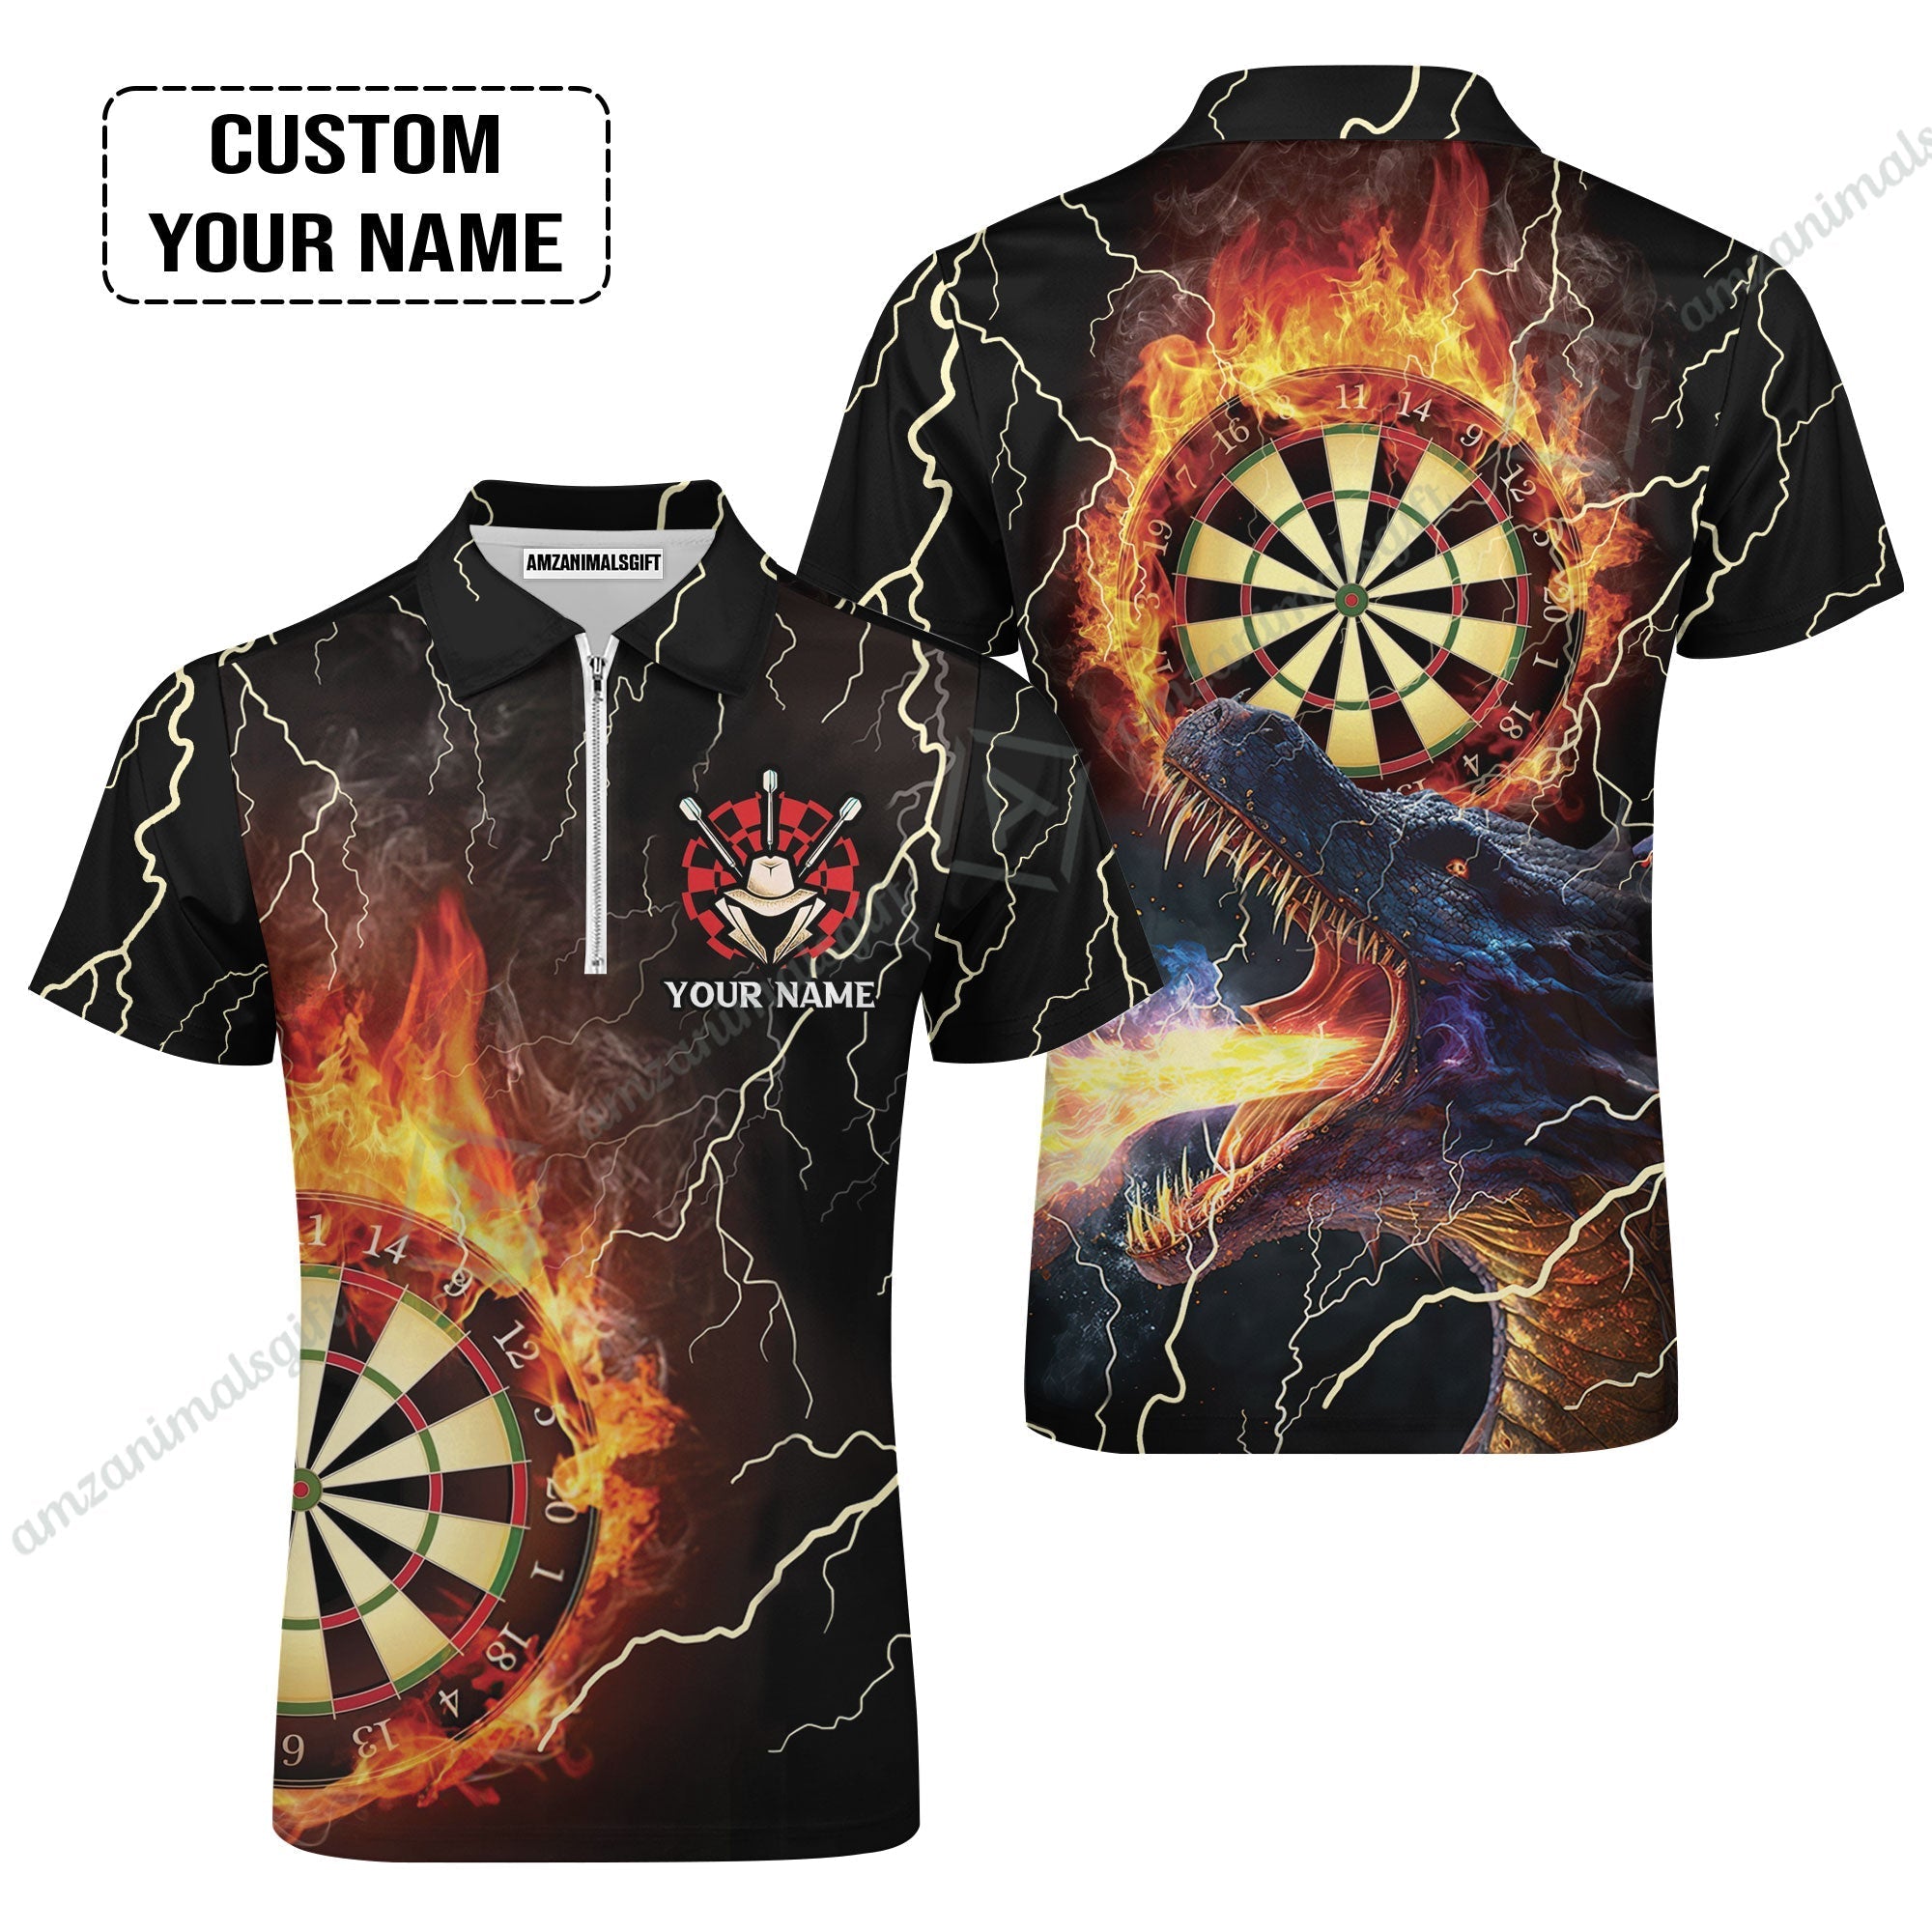 Customized Darts Zip Polo Shirt, Flame Dartboard, Personalized Name Dragon And Darts Zip Polo Shirt - Perfect Gift For Darts Lovers